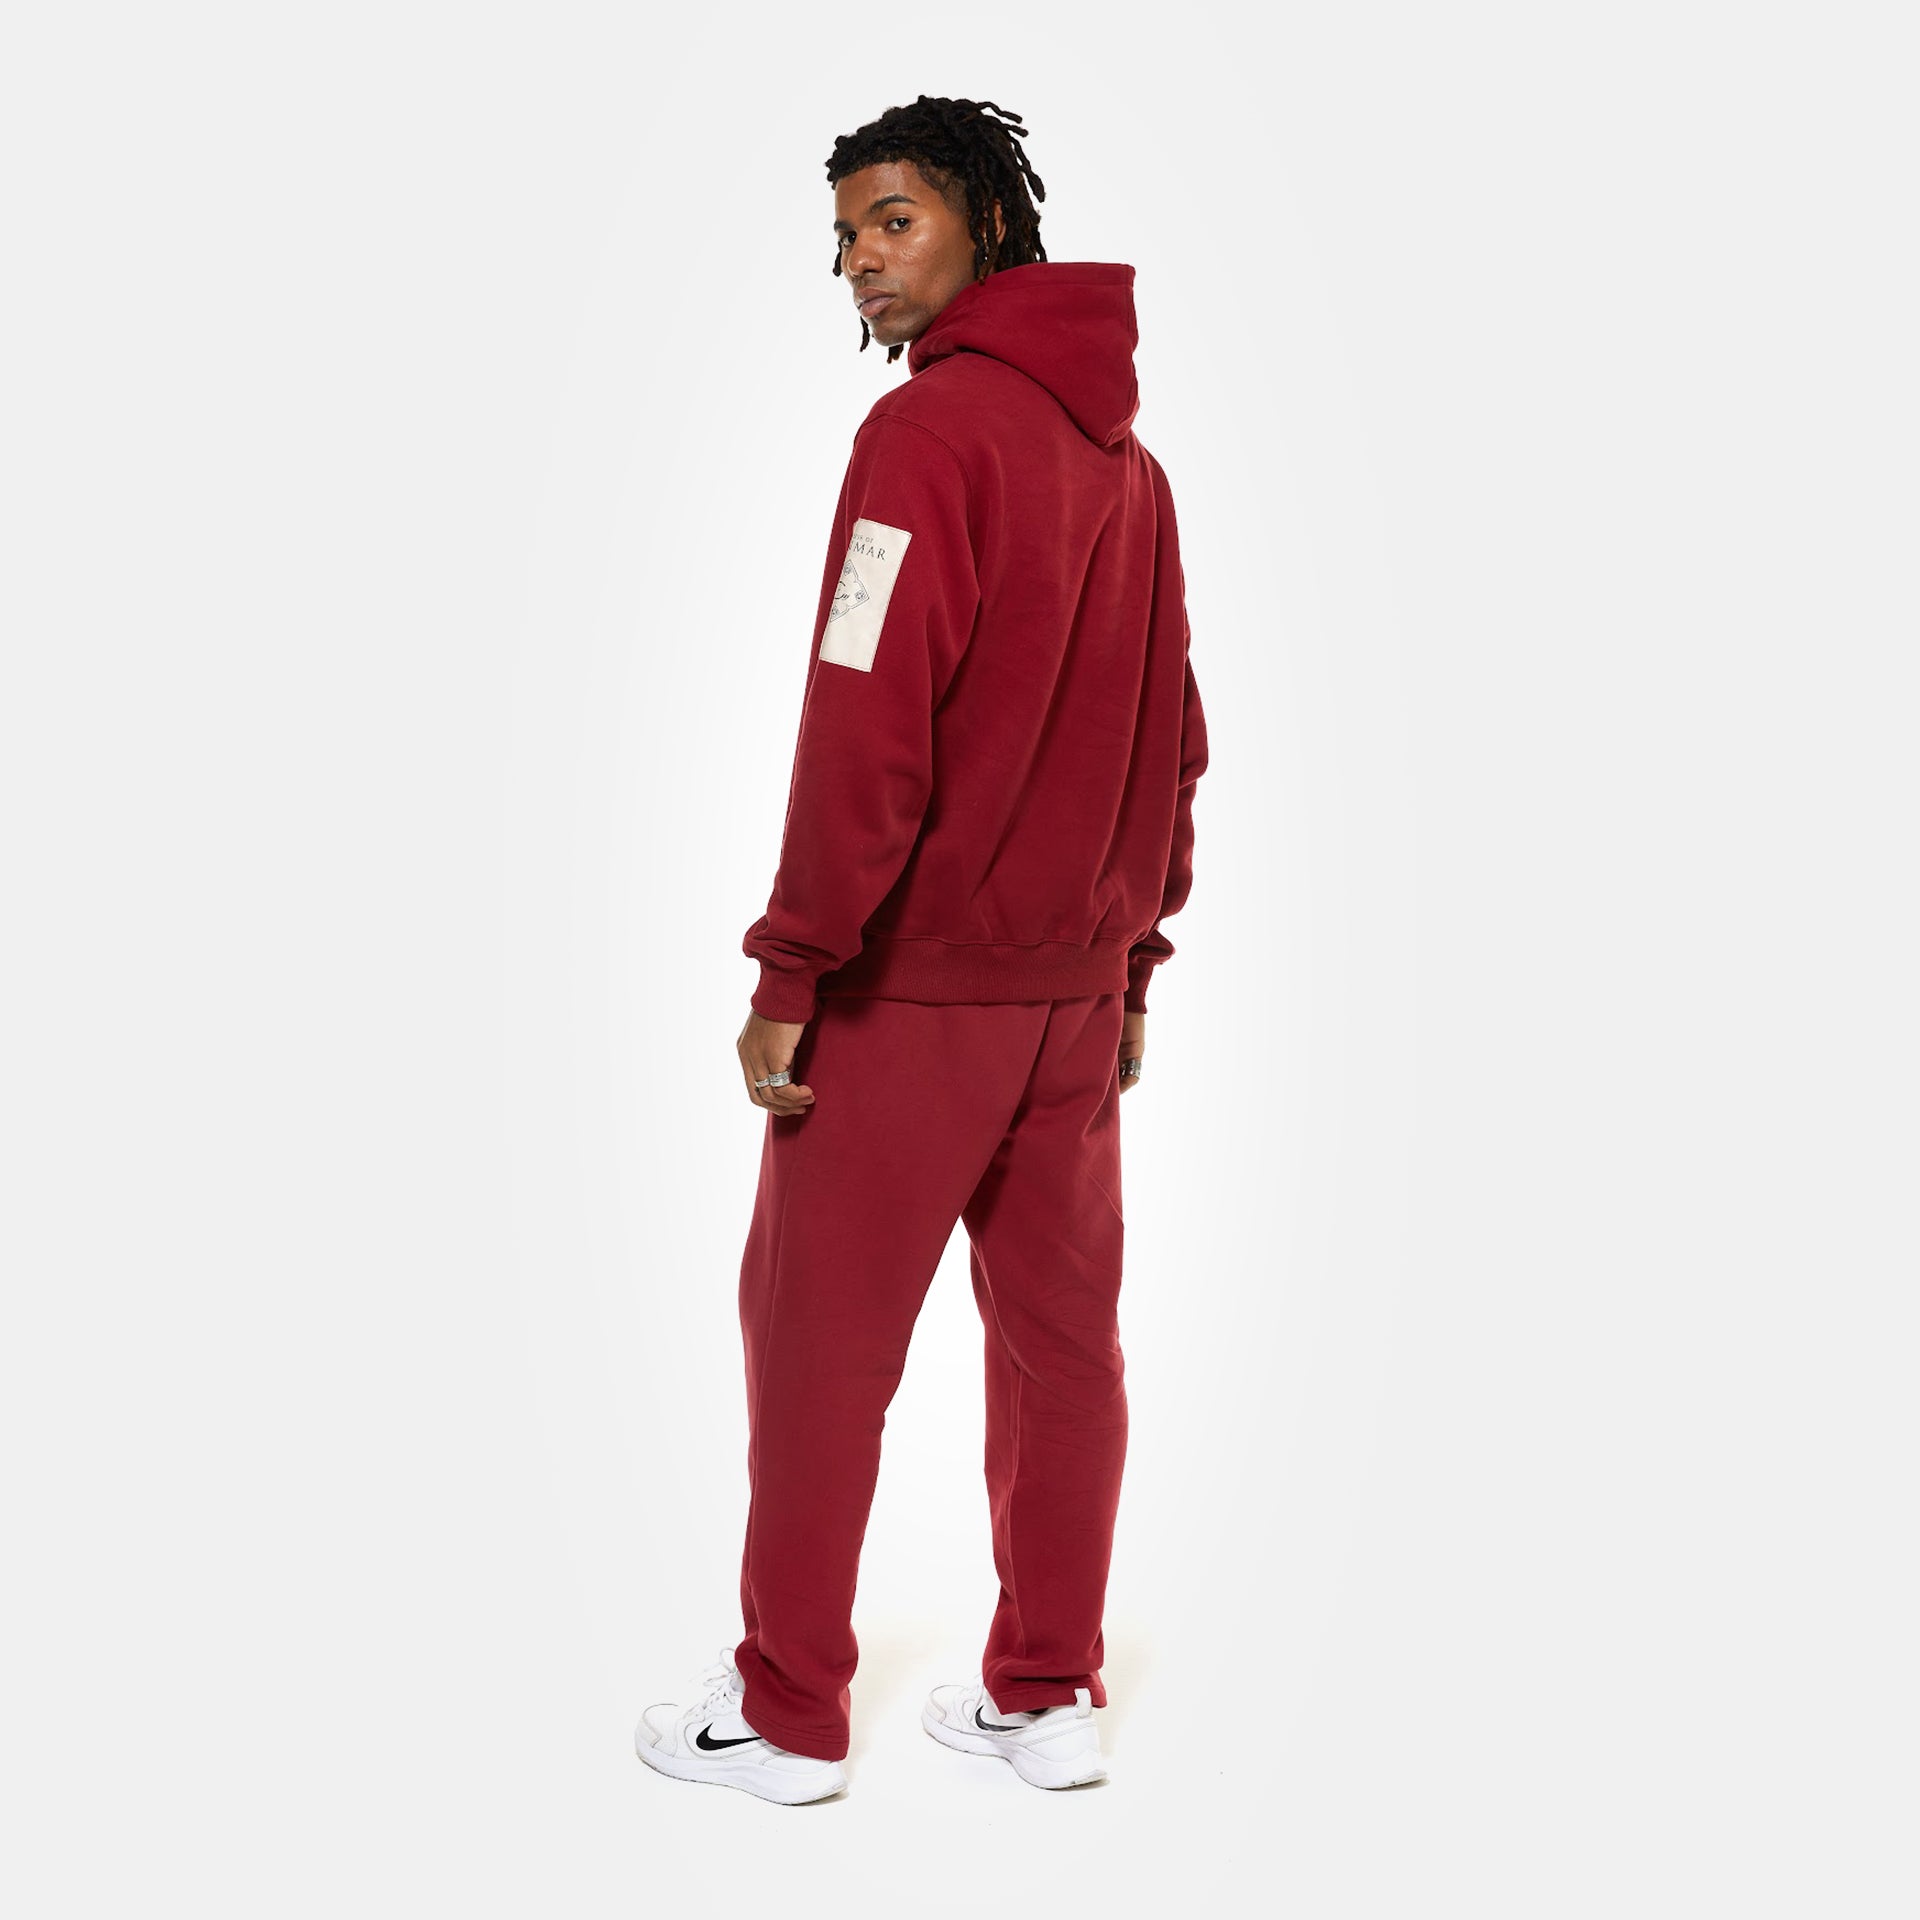 MAROON SWEATPANTS FROM HOUSE OF CENMAR